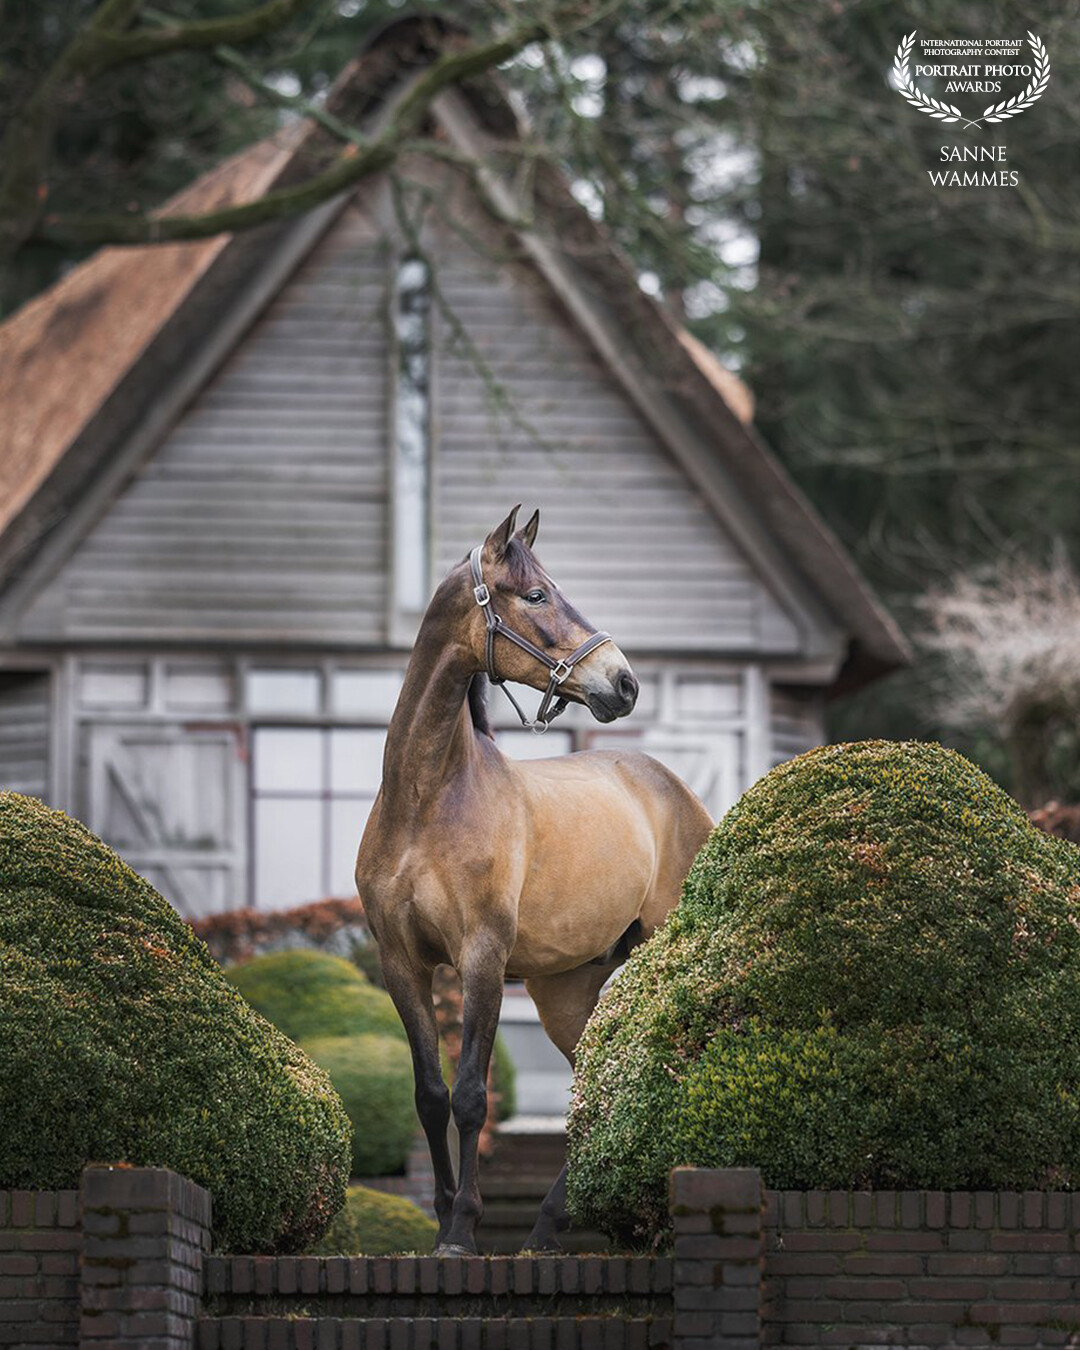 When it comes to photographing horses, the location can make all the difference. For me, this setting was unique and interesting and I love how this photo turned out.